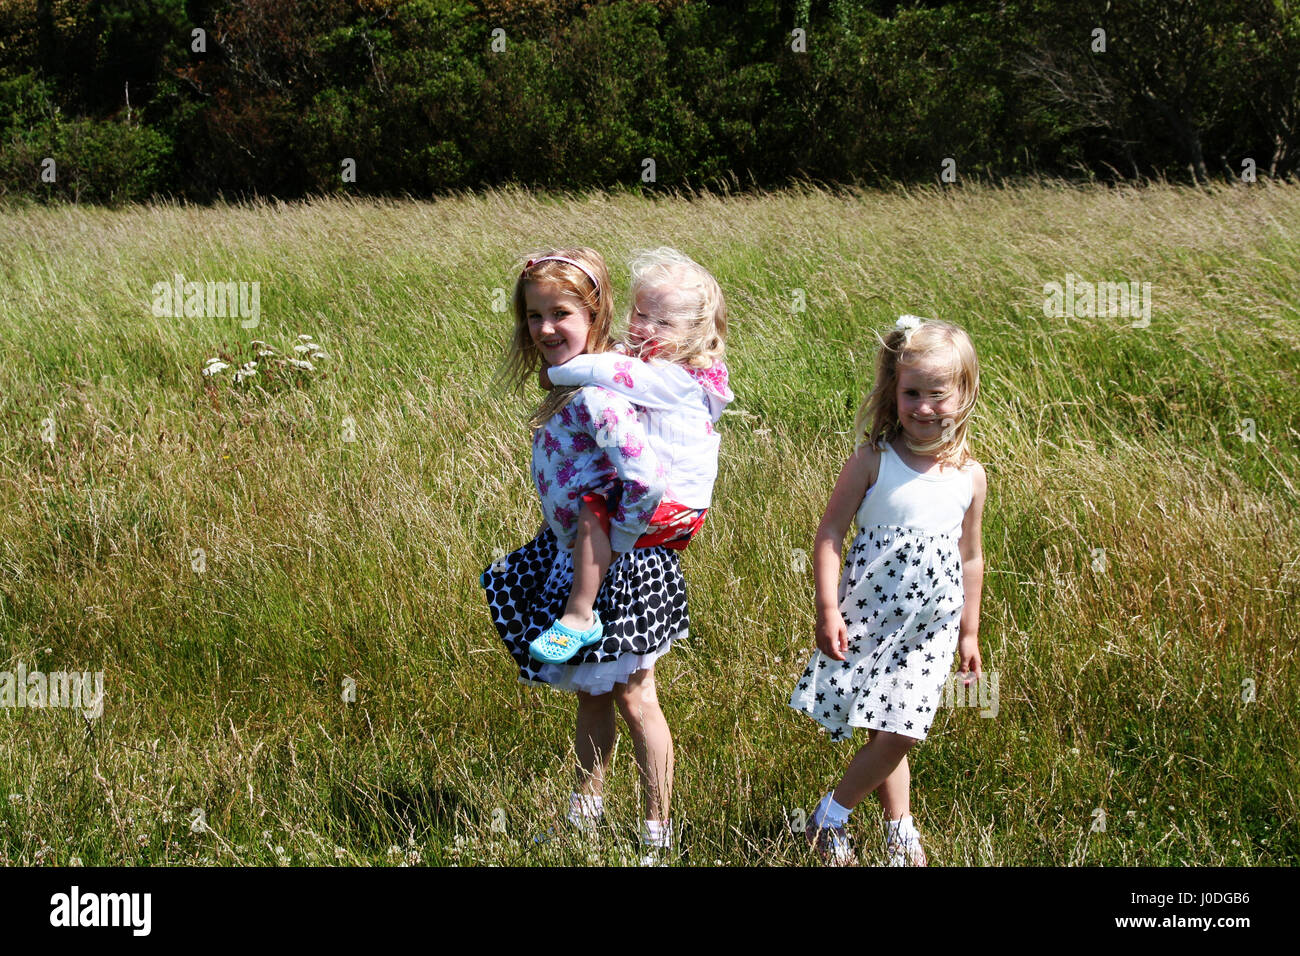 Children playing long grass free sunny summers day with windswept hair and summer dresses, piggyback , piggy back ride Dublin Ireland freedom carefree Stock Photo